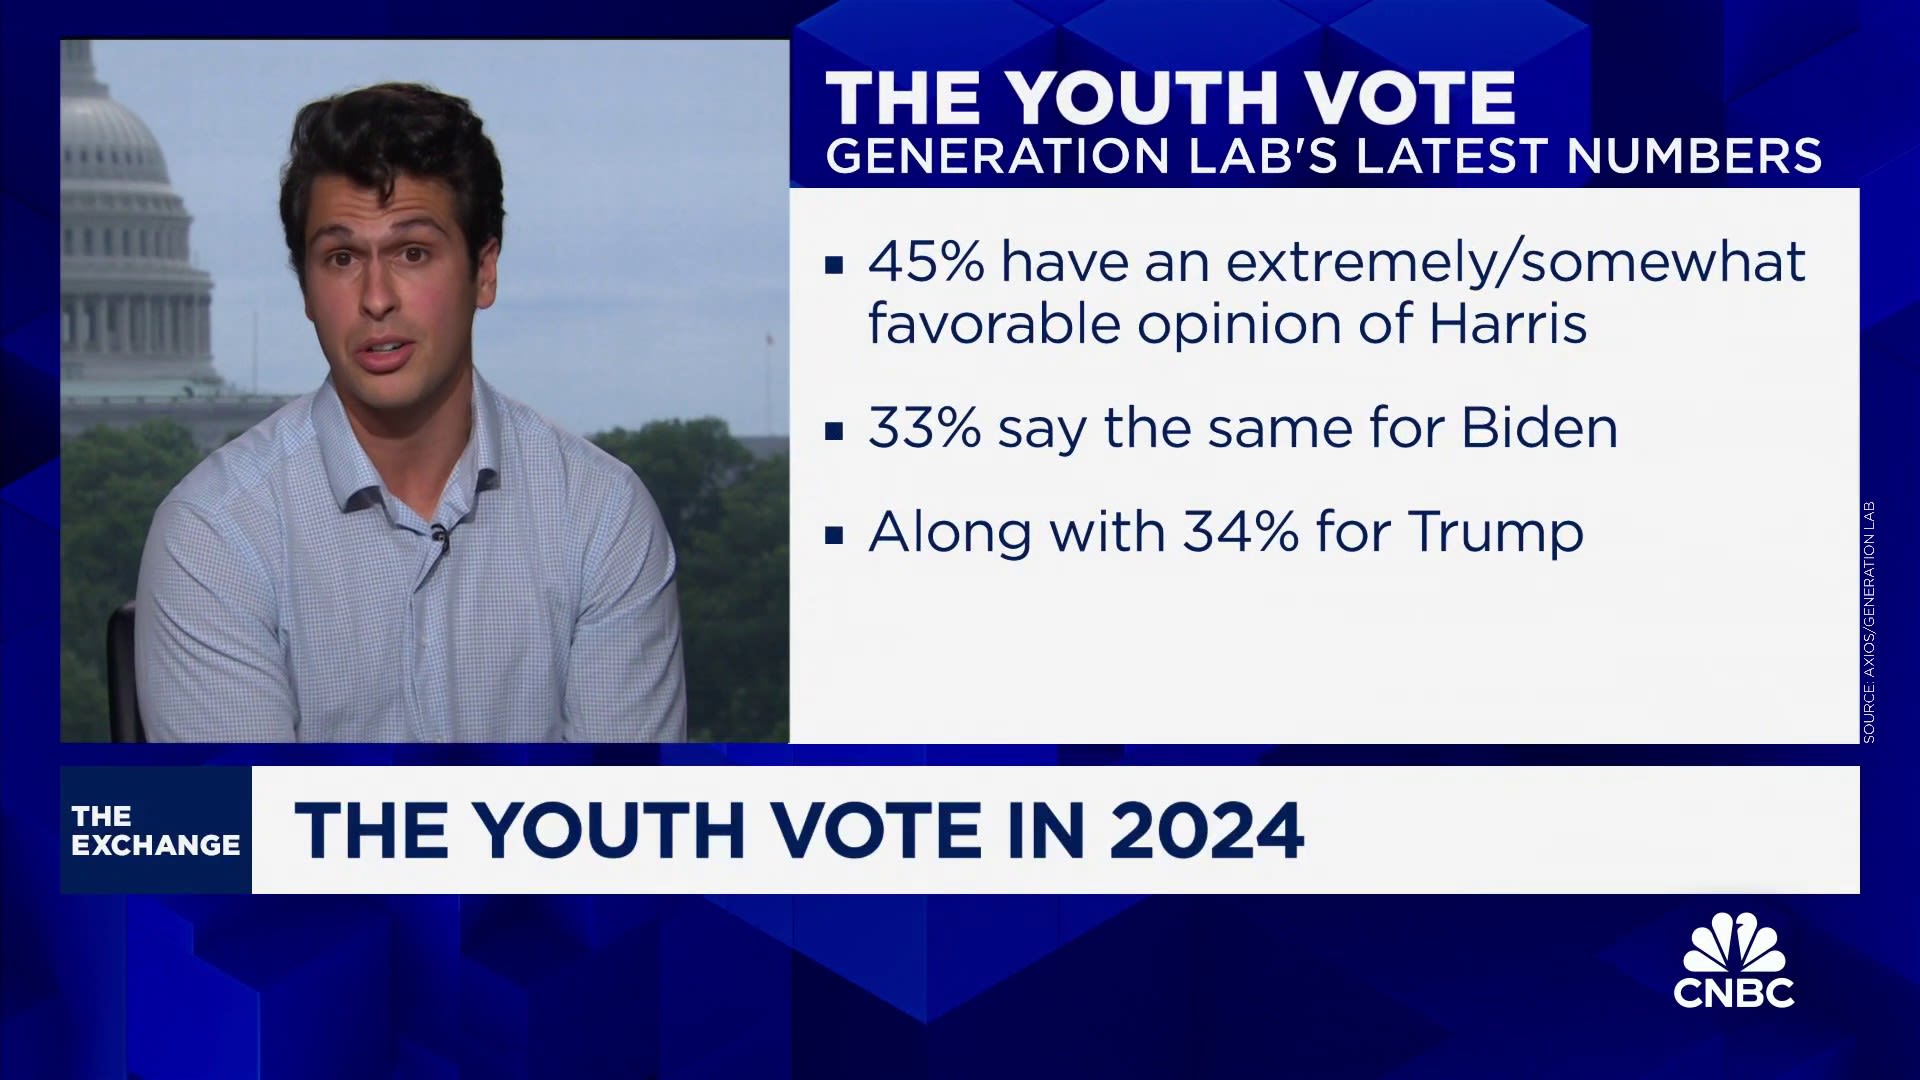 Data suggests Harris could pull 'Obama level' youth vote, says Generation Lab's Cyrus Beschloss